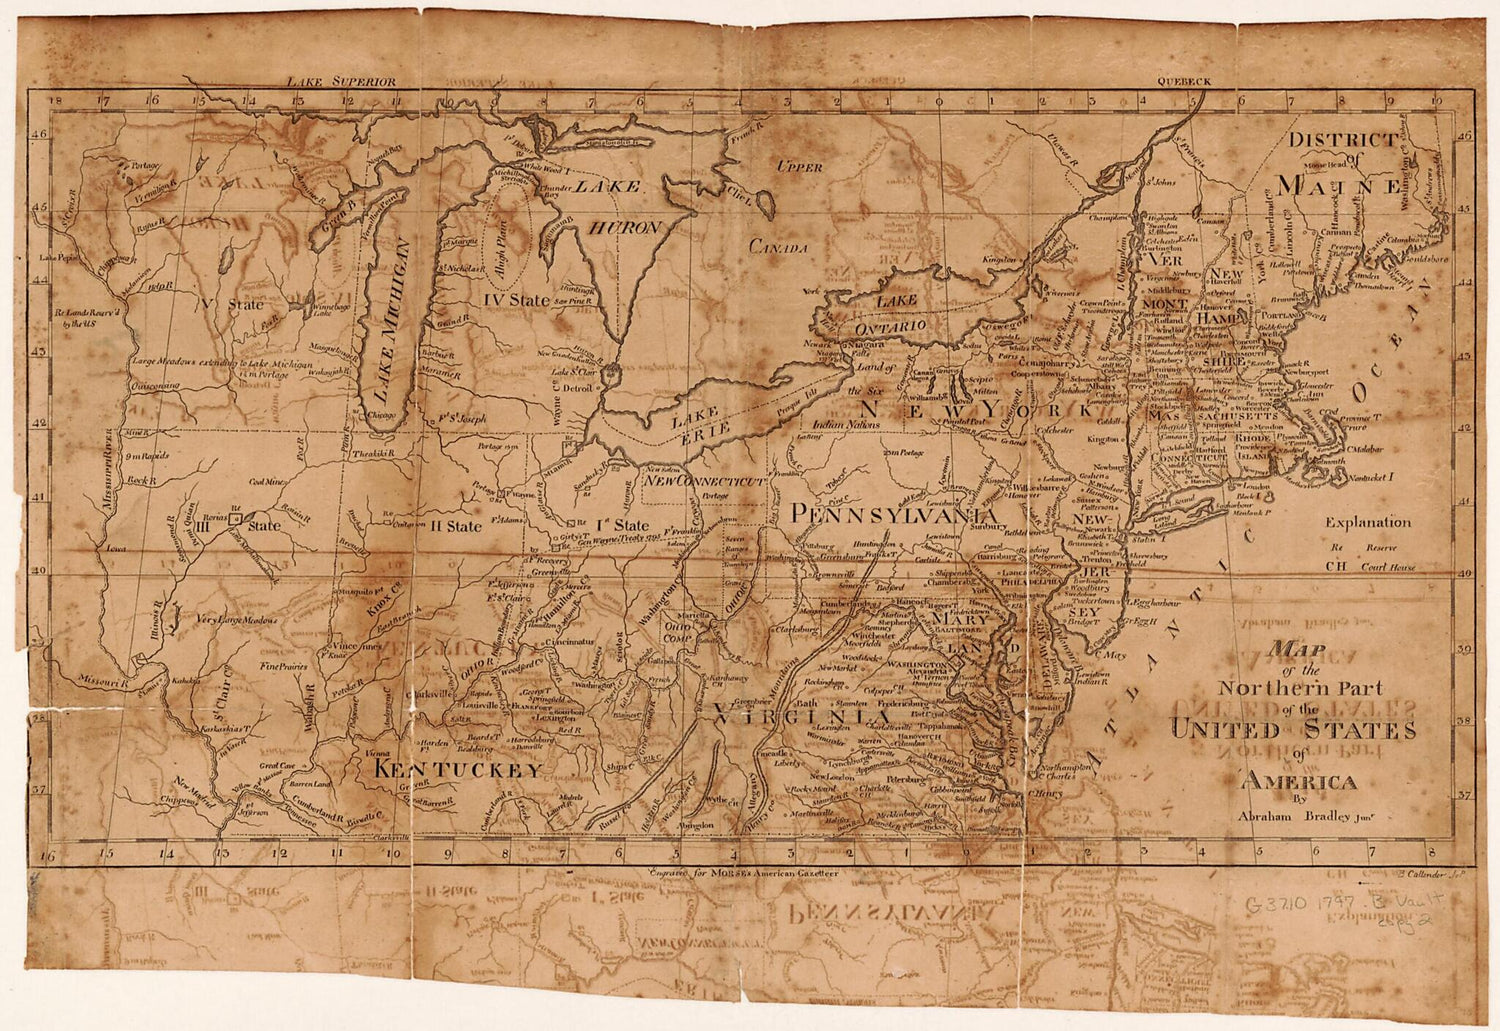 This old map of Map of the Northern Part of the United States of America from 1797 was created by Abraham Bradley, Benjamin Callender, Jedidiah Morse in 1797